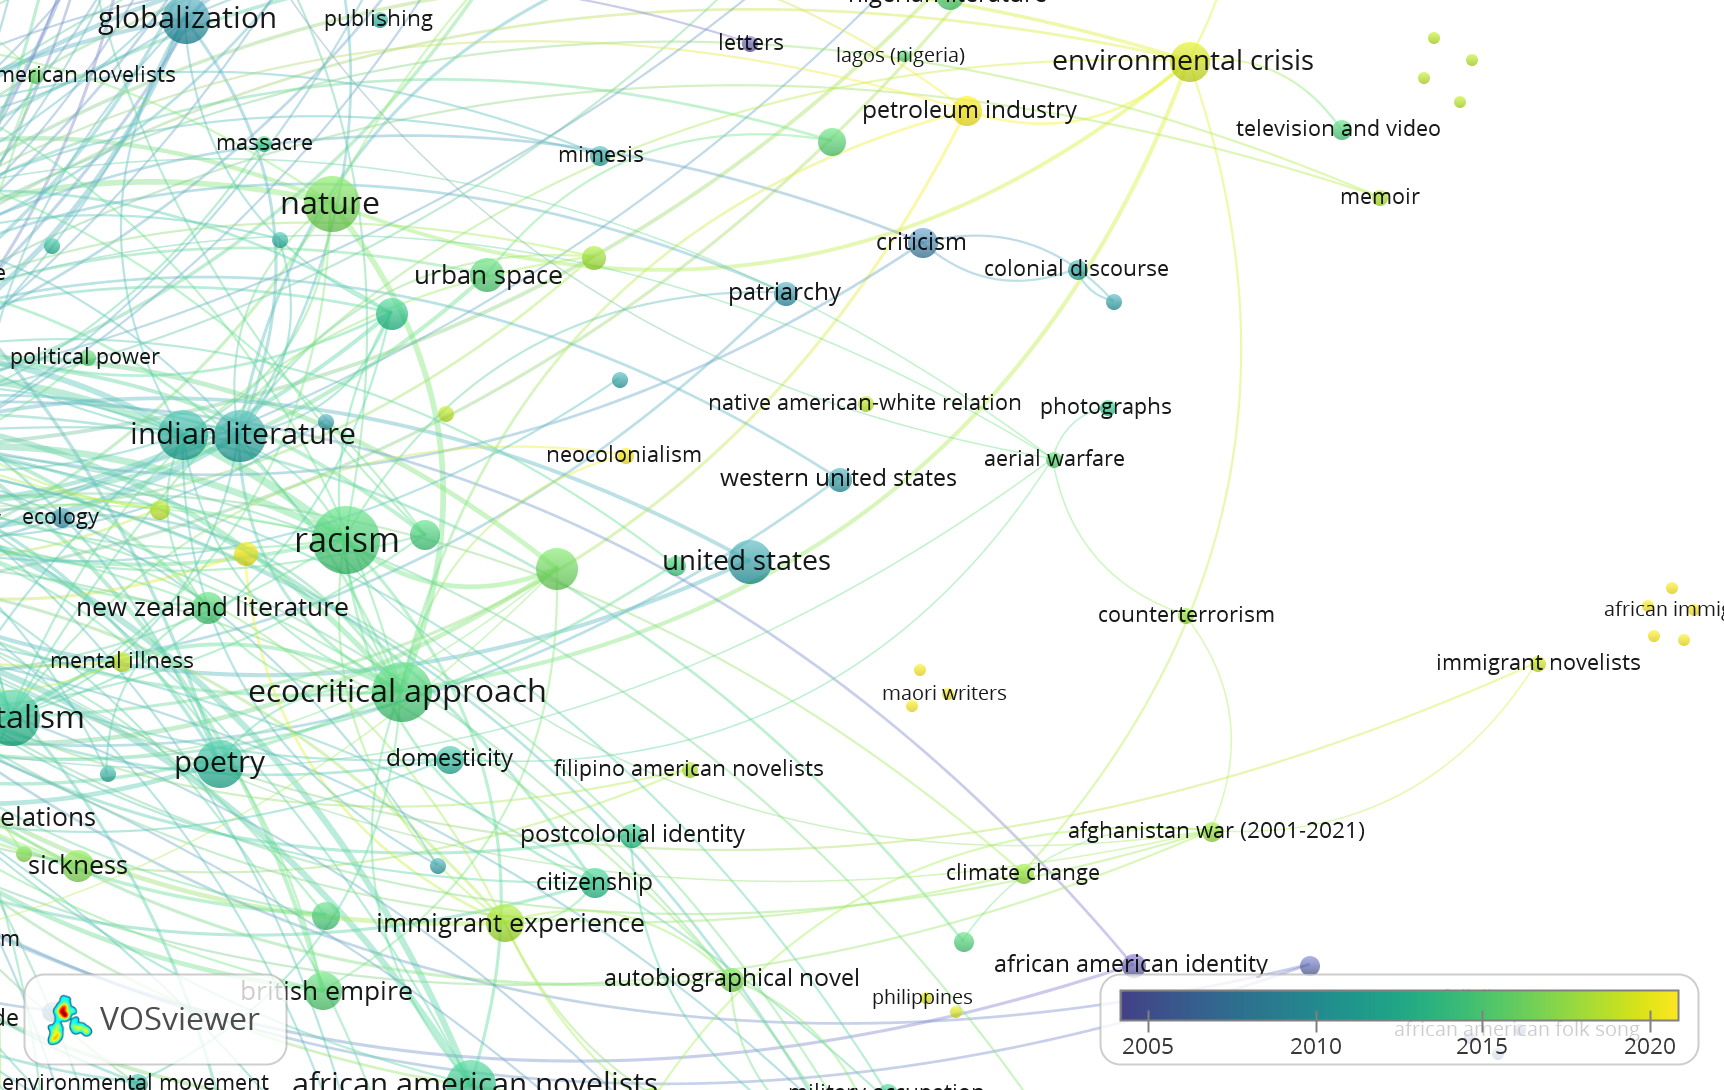 Screenshot of network diagram from figure 2, zoomed in on the community around ecocritical approach